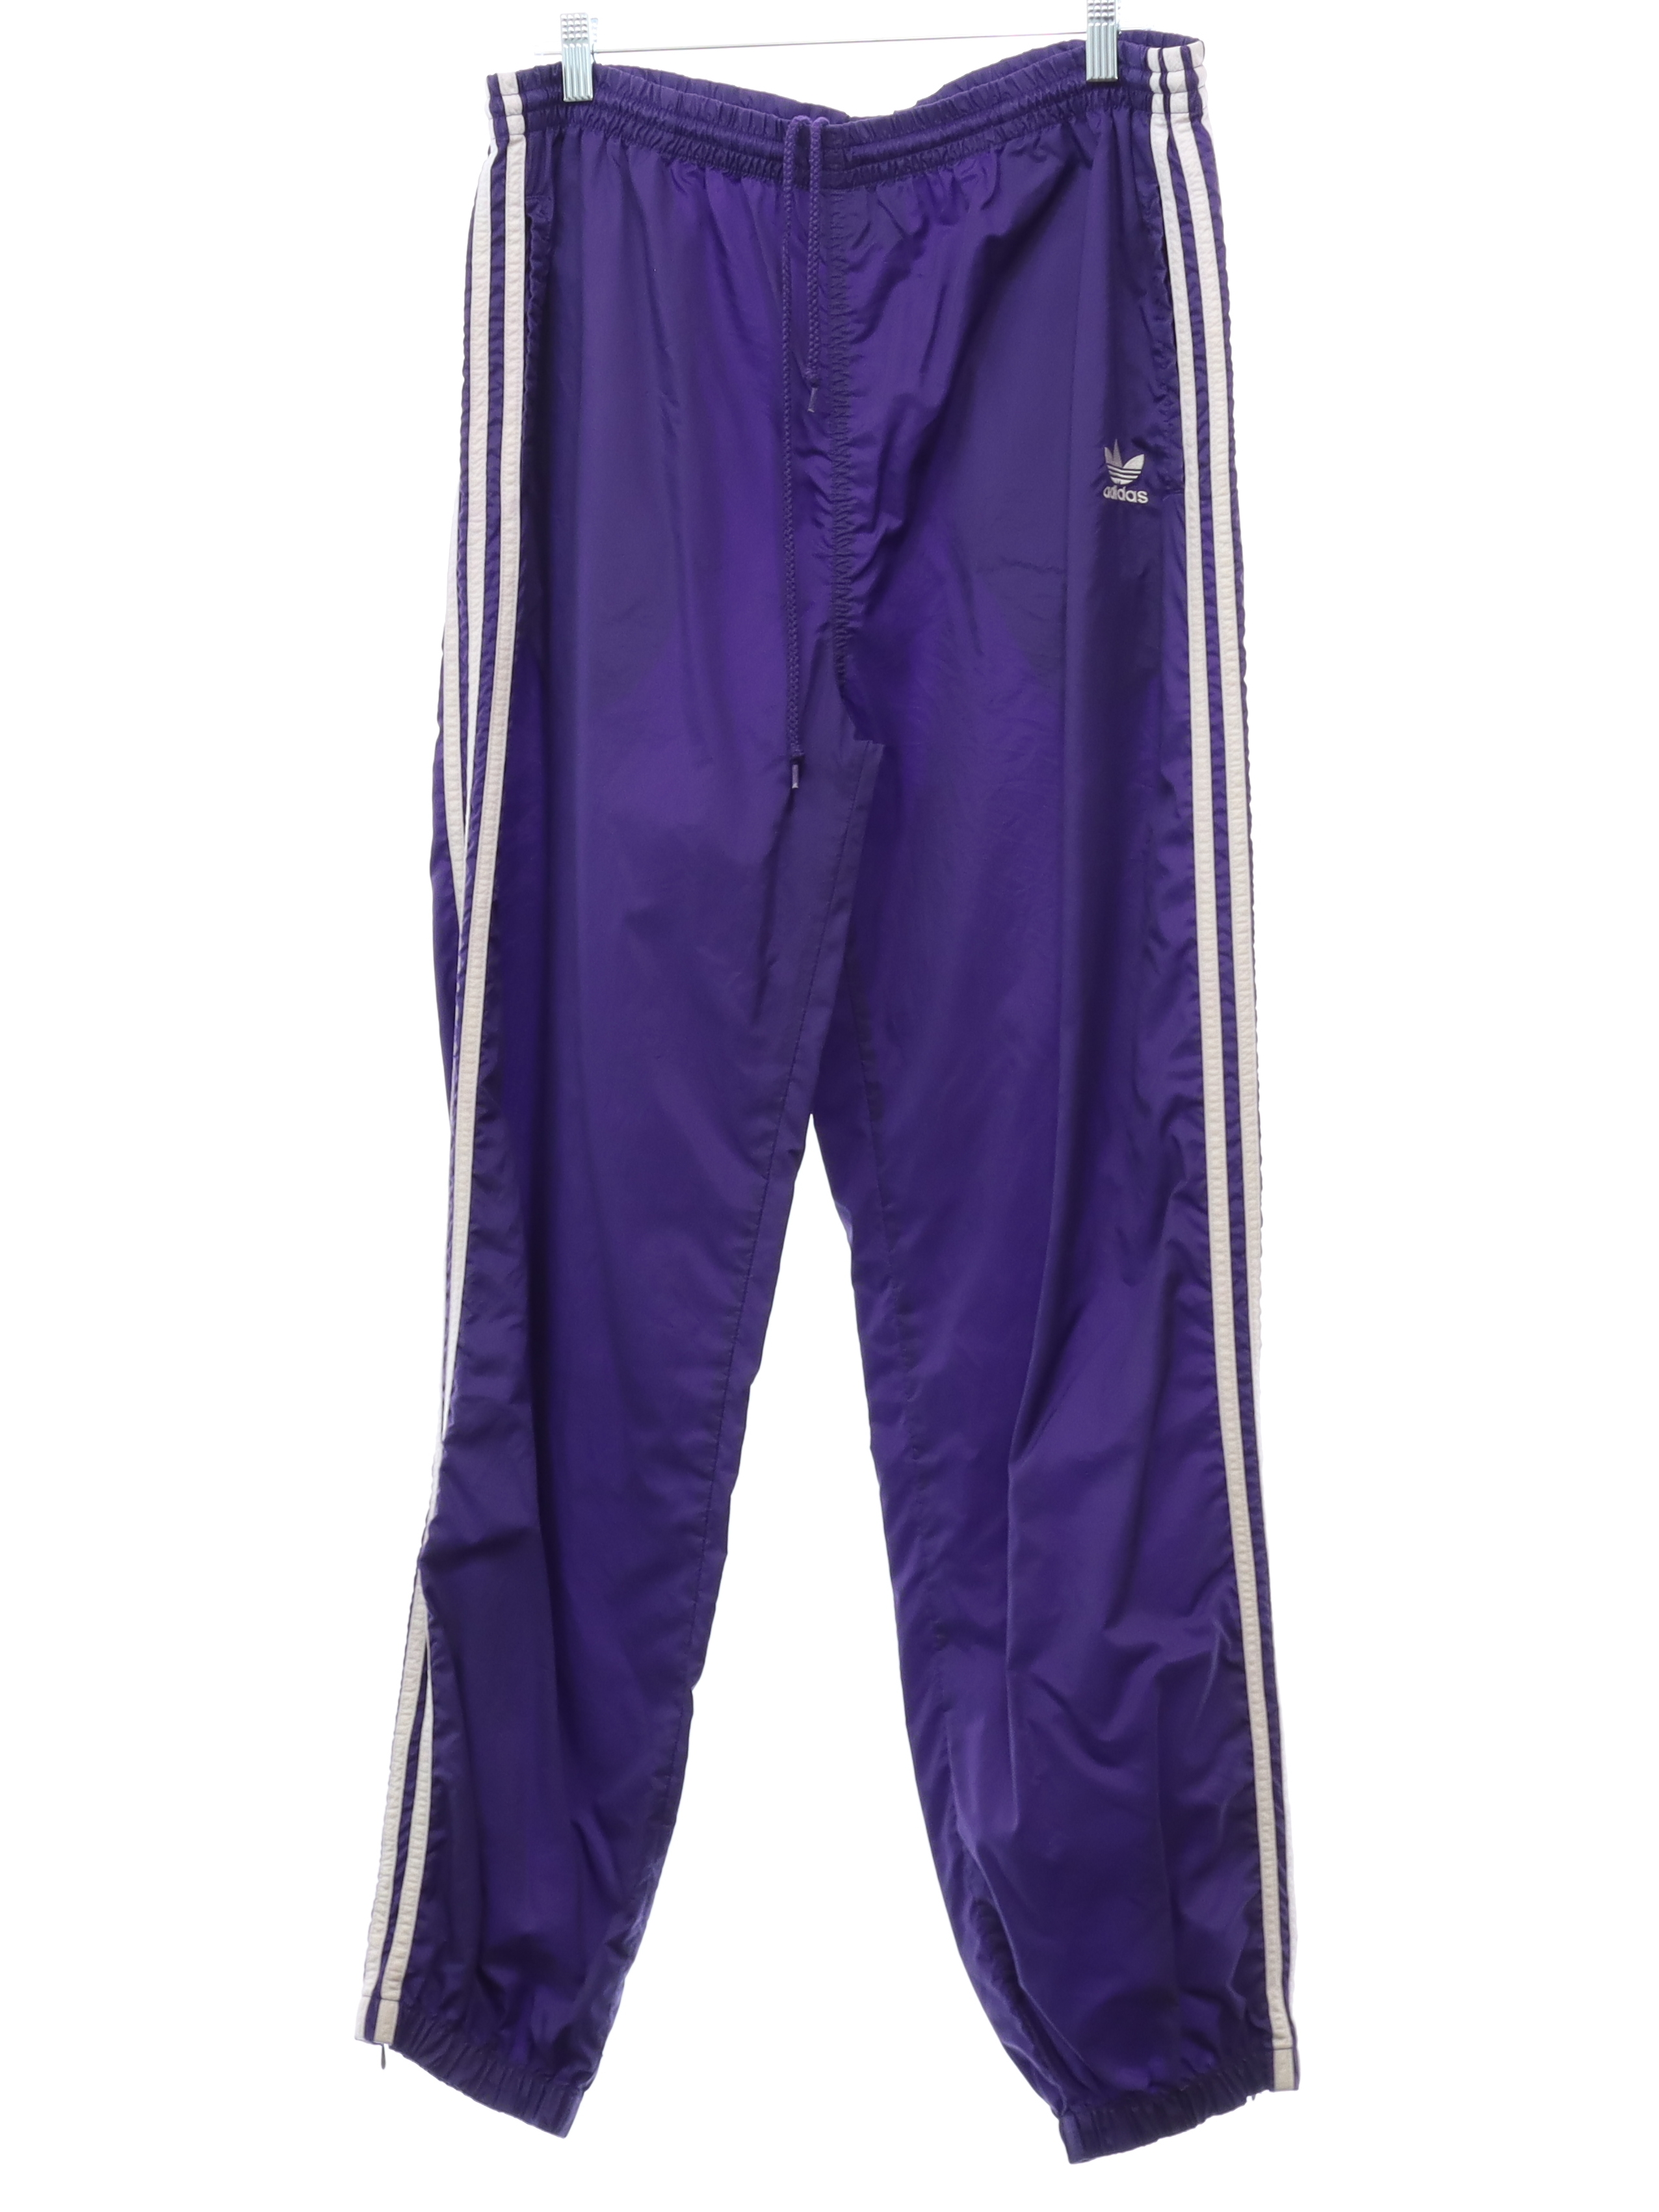 90's Vintage Pants: Late 90s -Adidas- Mens purple solid colored